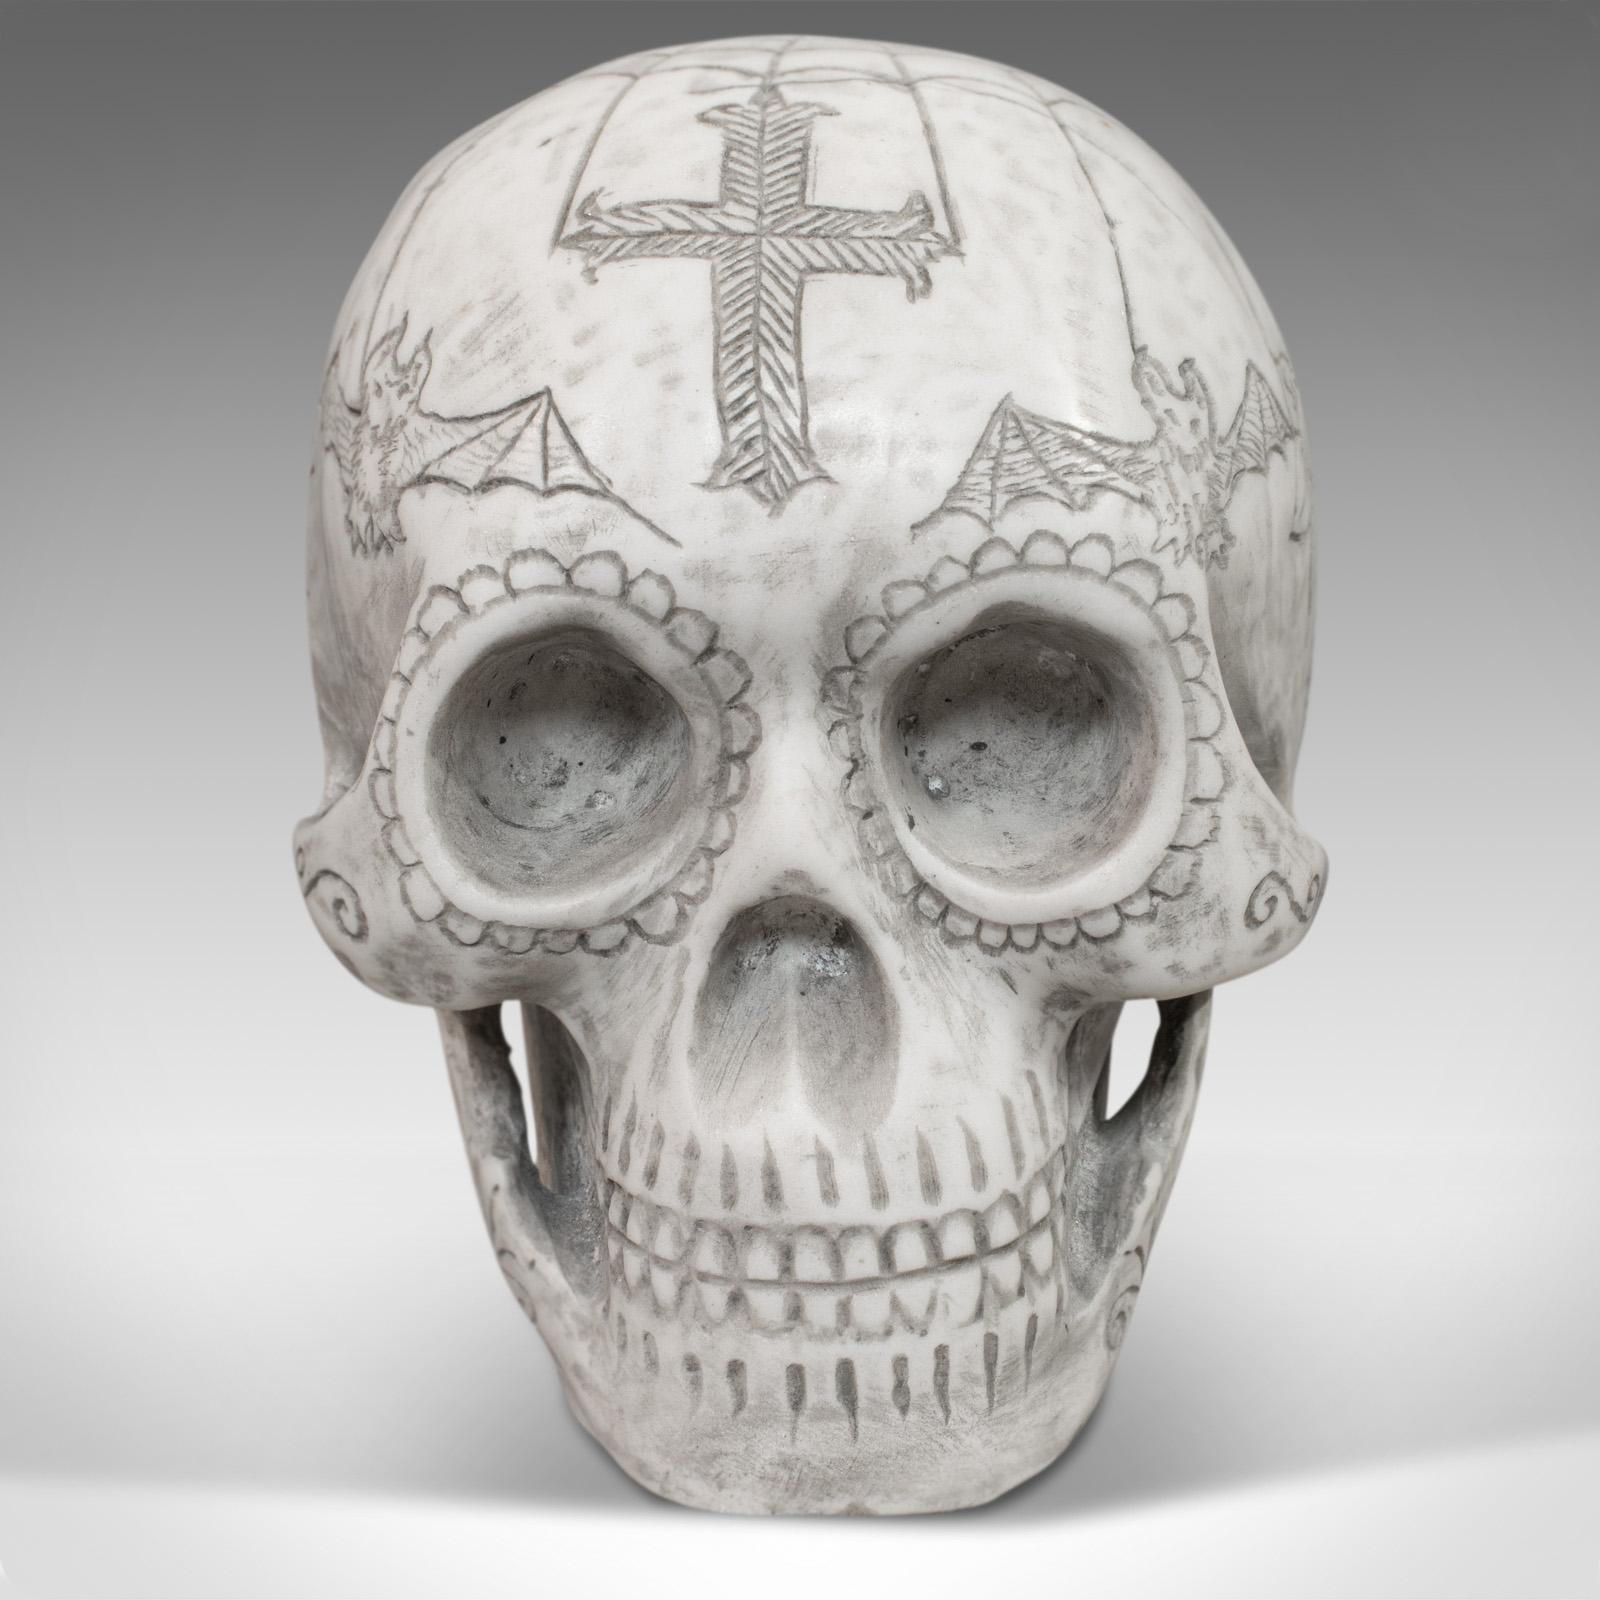 This is a vintage hand decorated skull. An English marble ornament or paperweight finished by Dominic Hurley, dating to the late 20th century.

One-off, unusual design 
Displays a desirable aged patina
Pleasingly reassuring weight of 11kg